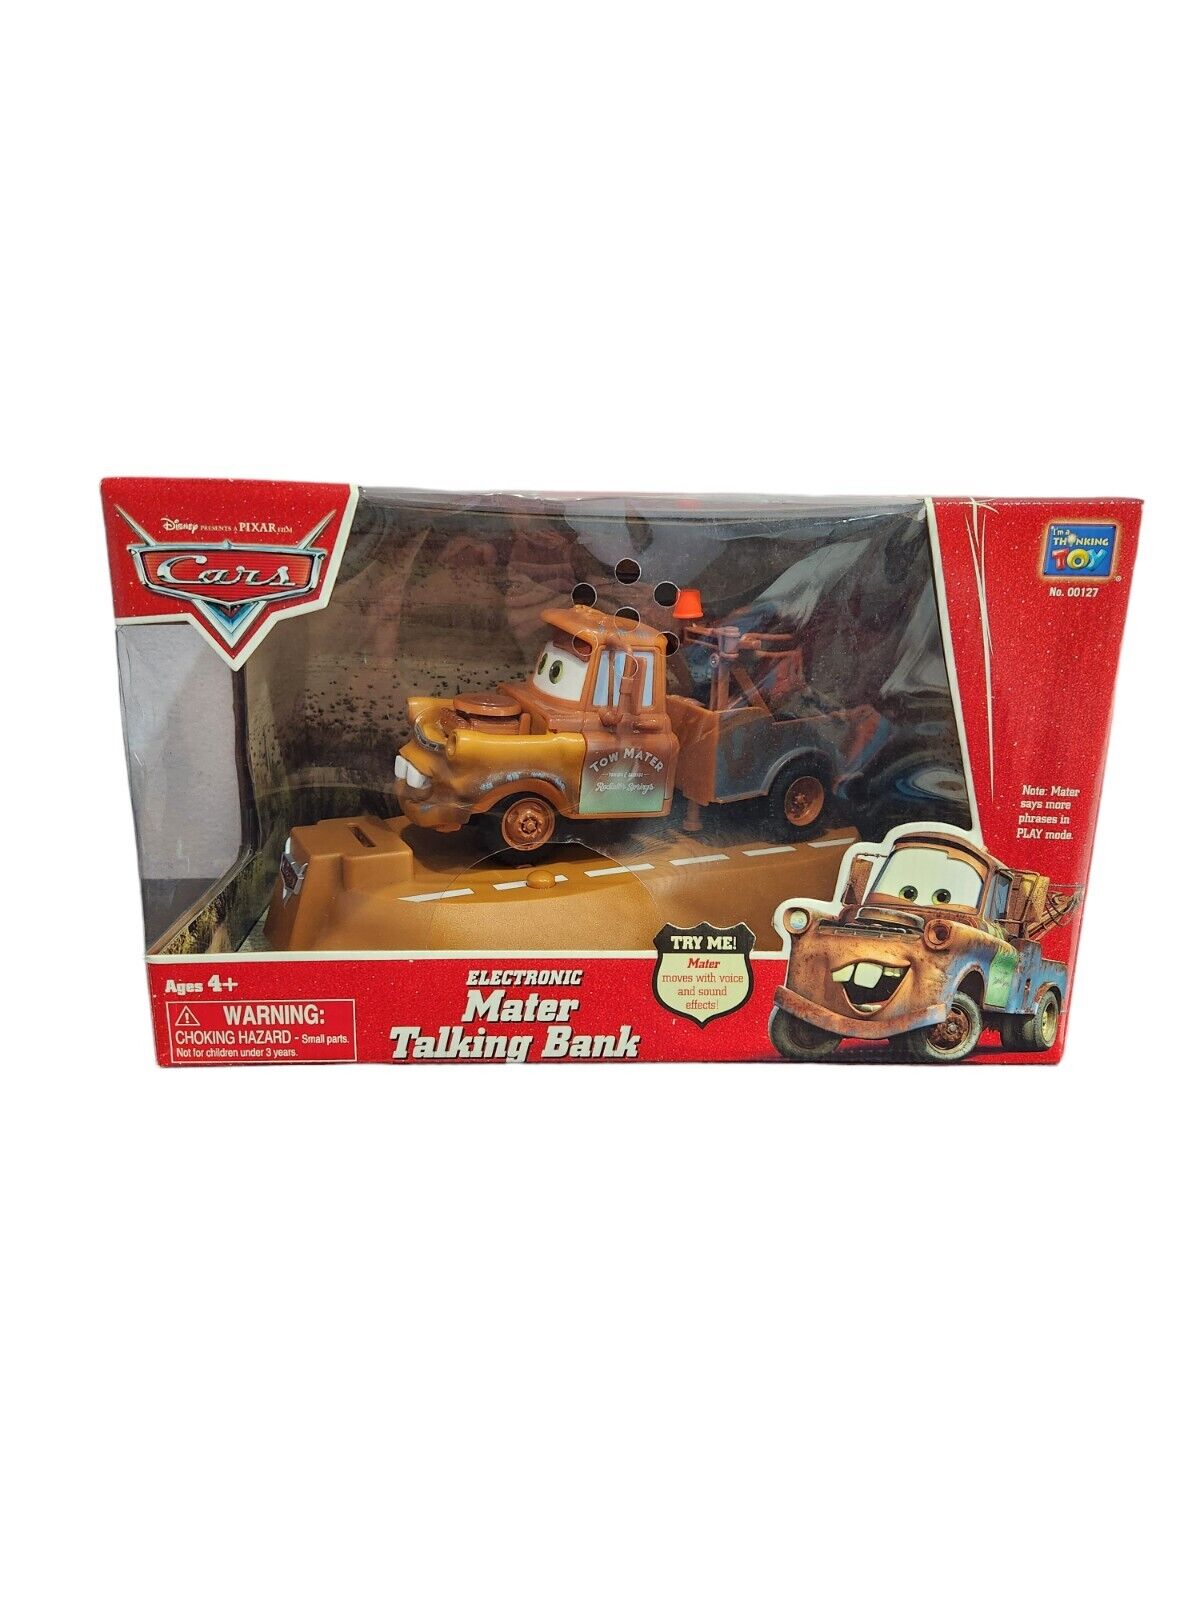 Disney Pixar Cars Tow Mater Electronic Talking Coin Bank New Sealed